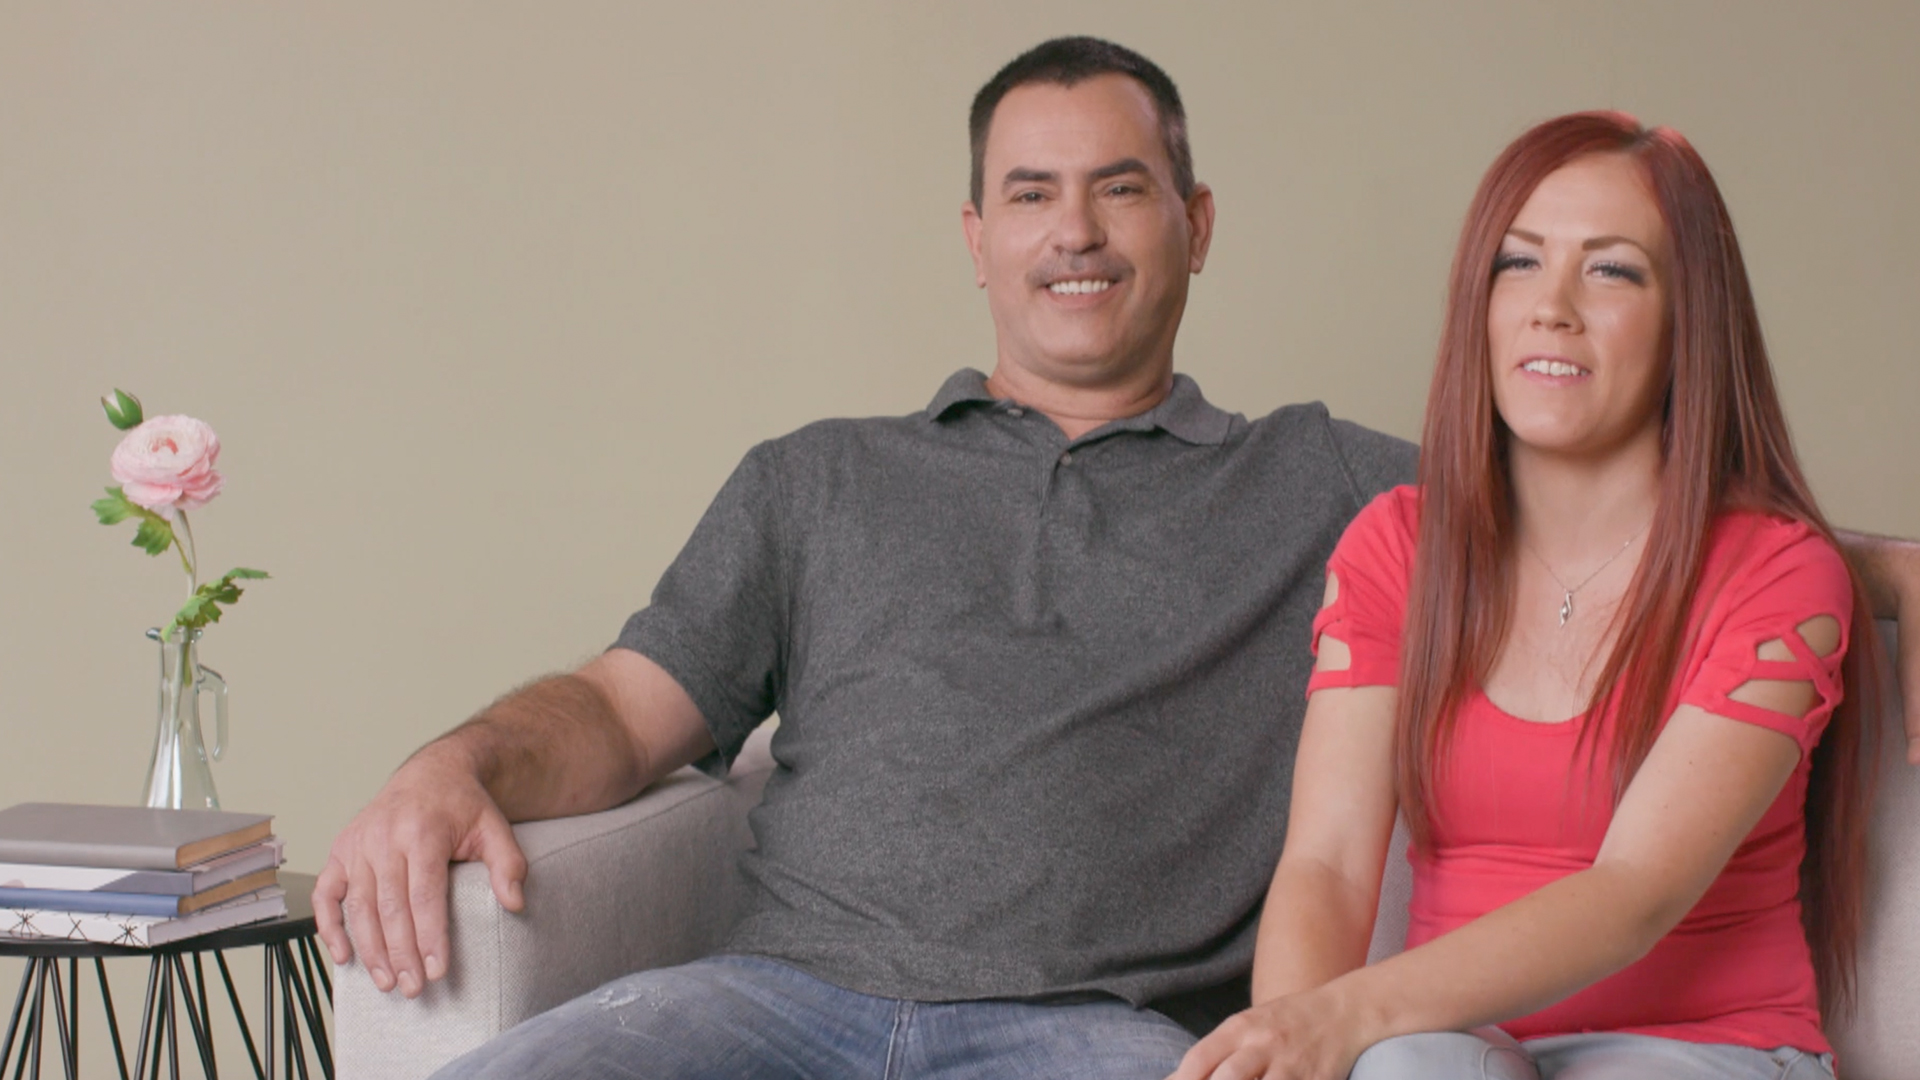 Watch Catching Up With Shawn & Sara! | Life After Lockup Video Extras